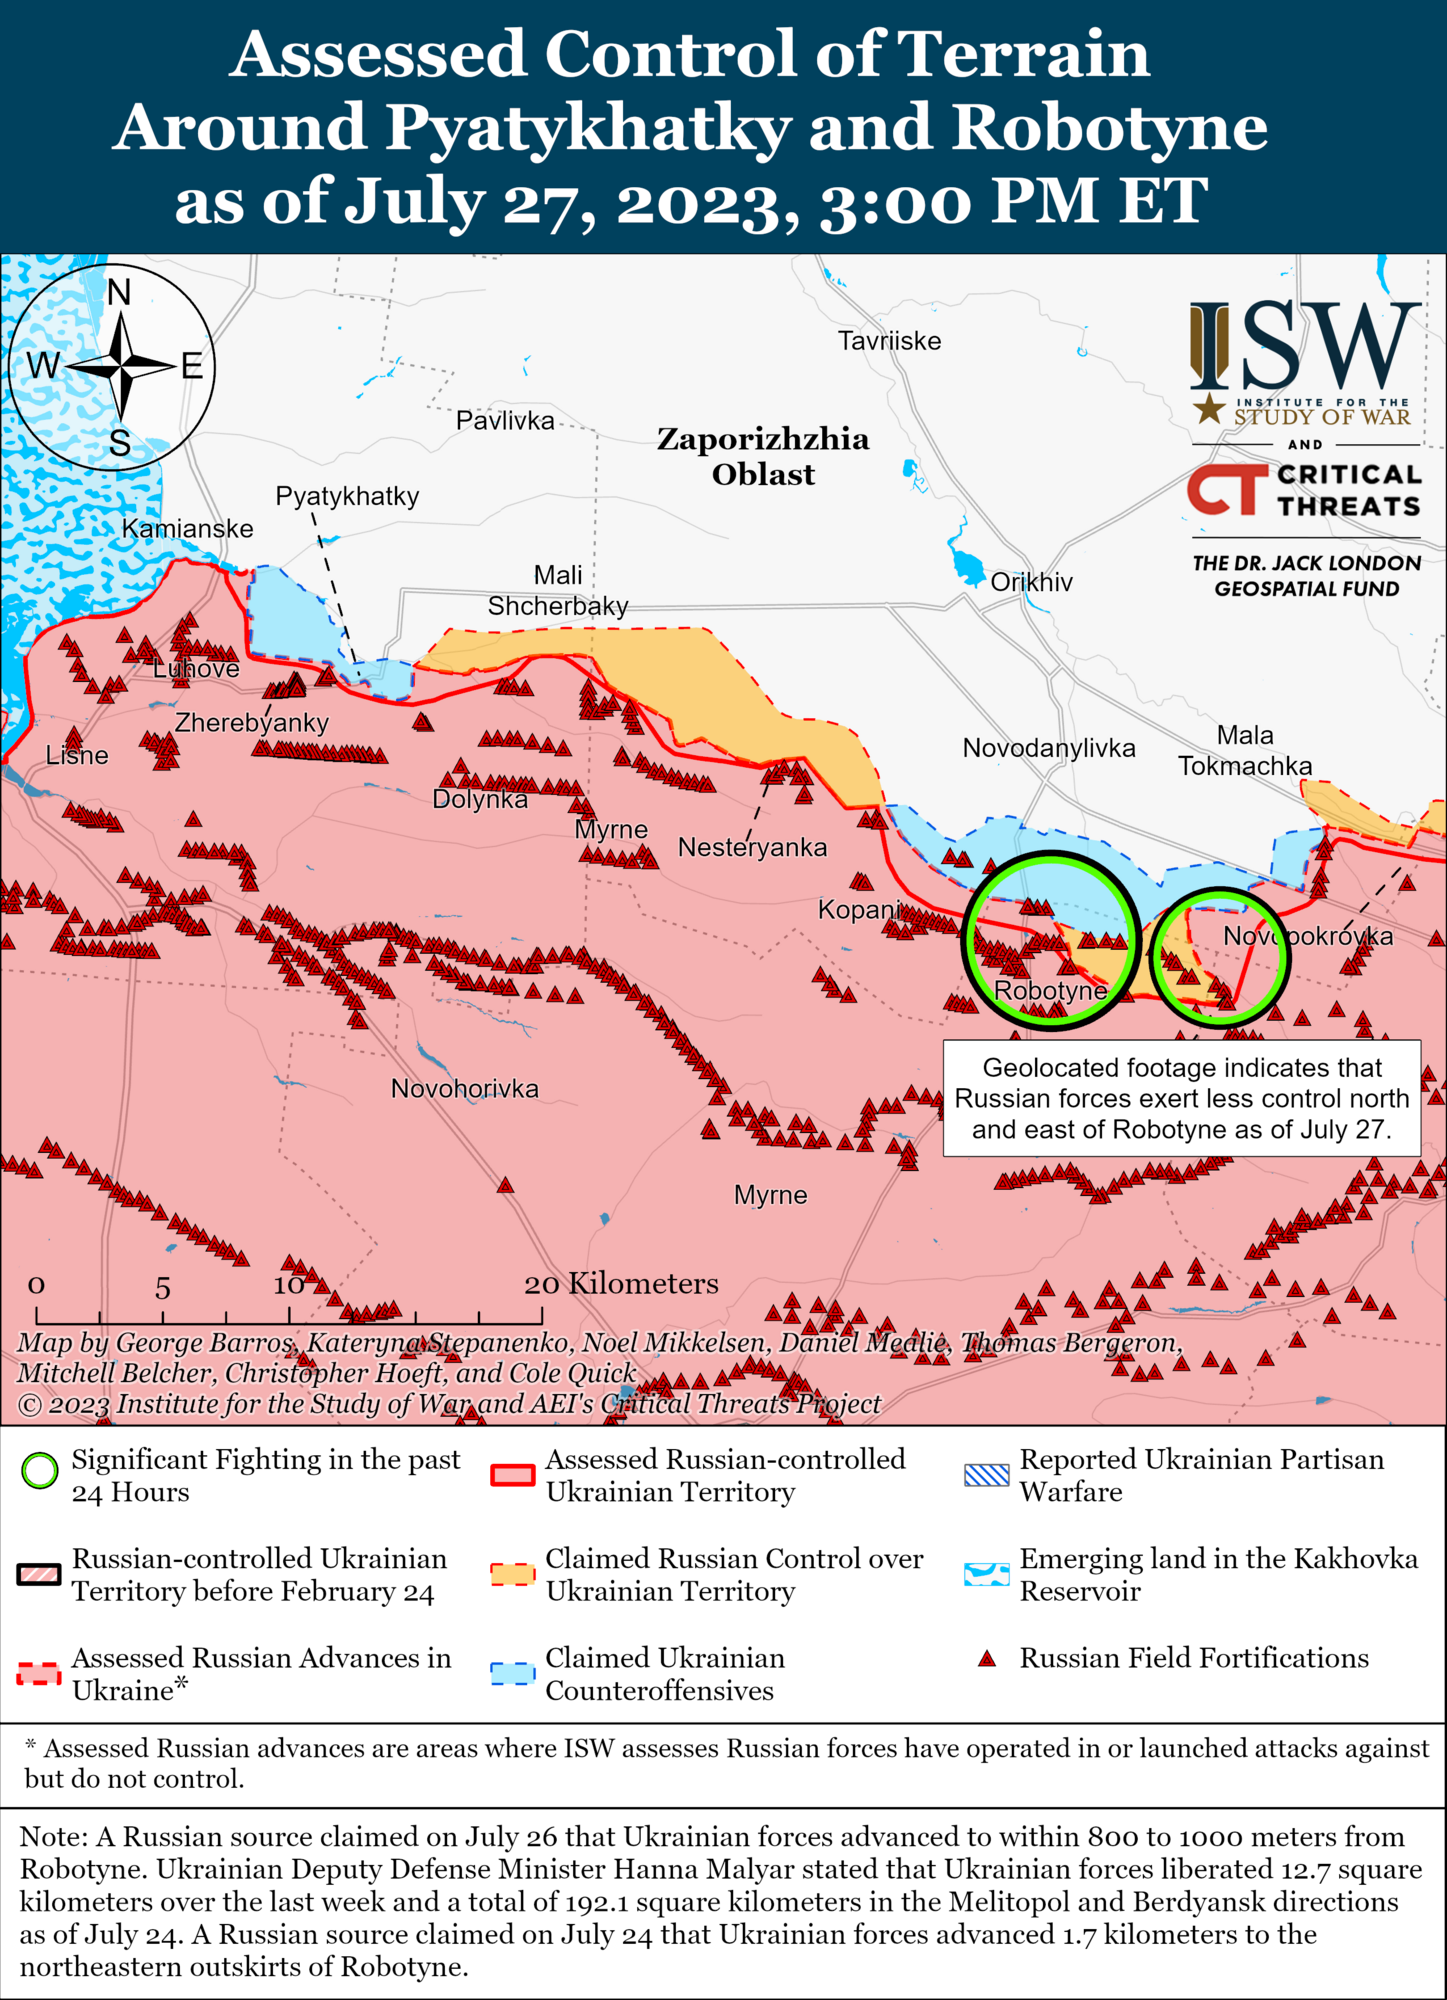 Kremlin tries to portray AFU counteroffensive as failure: ISW pointed to Putin's desperation